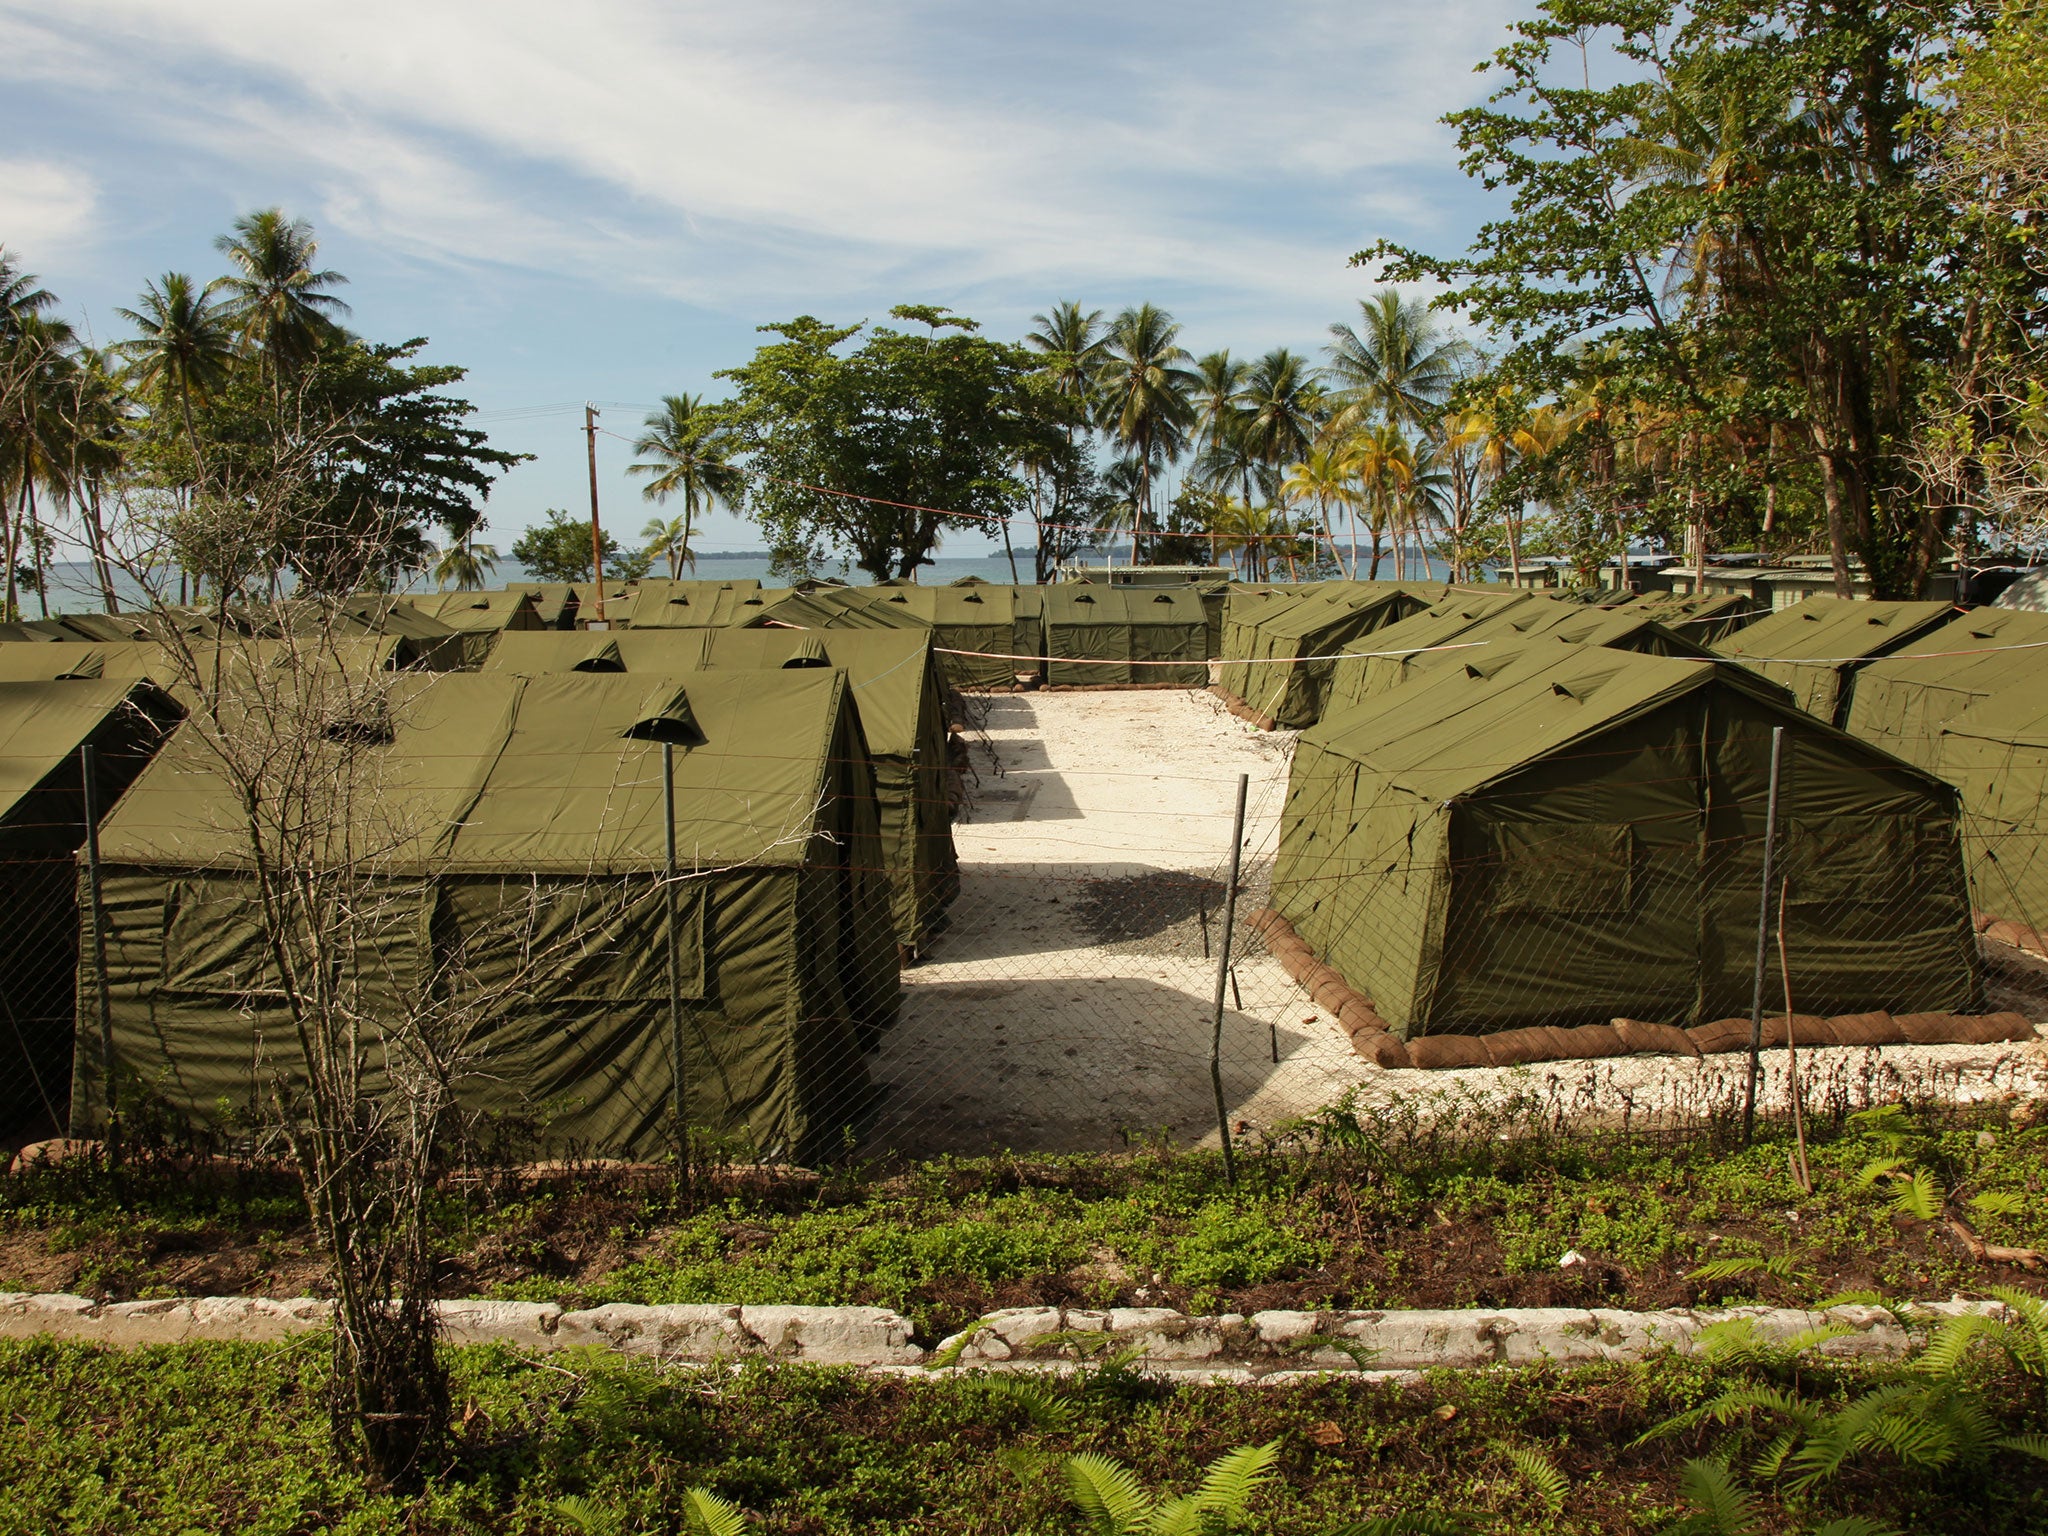 The Manus Island Regional Processing Facility, used for the detention of asylum seekers that arrive by boat